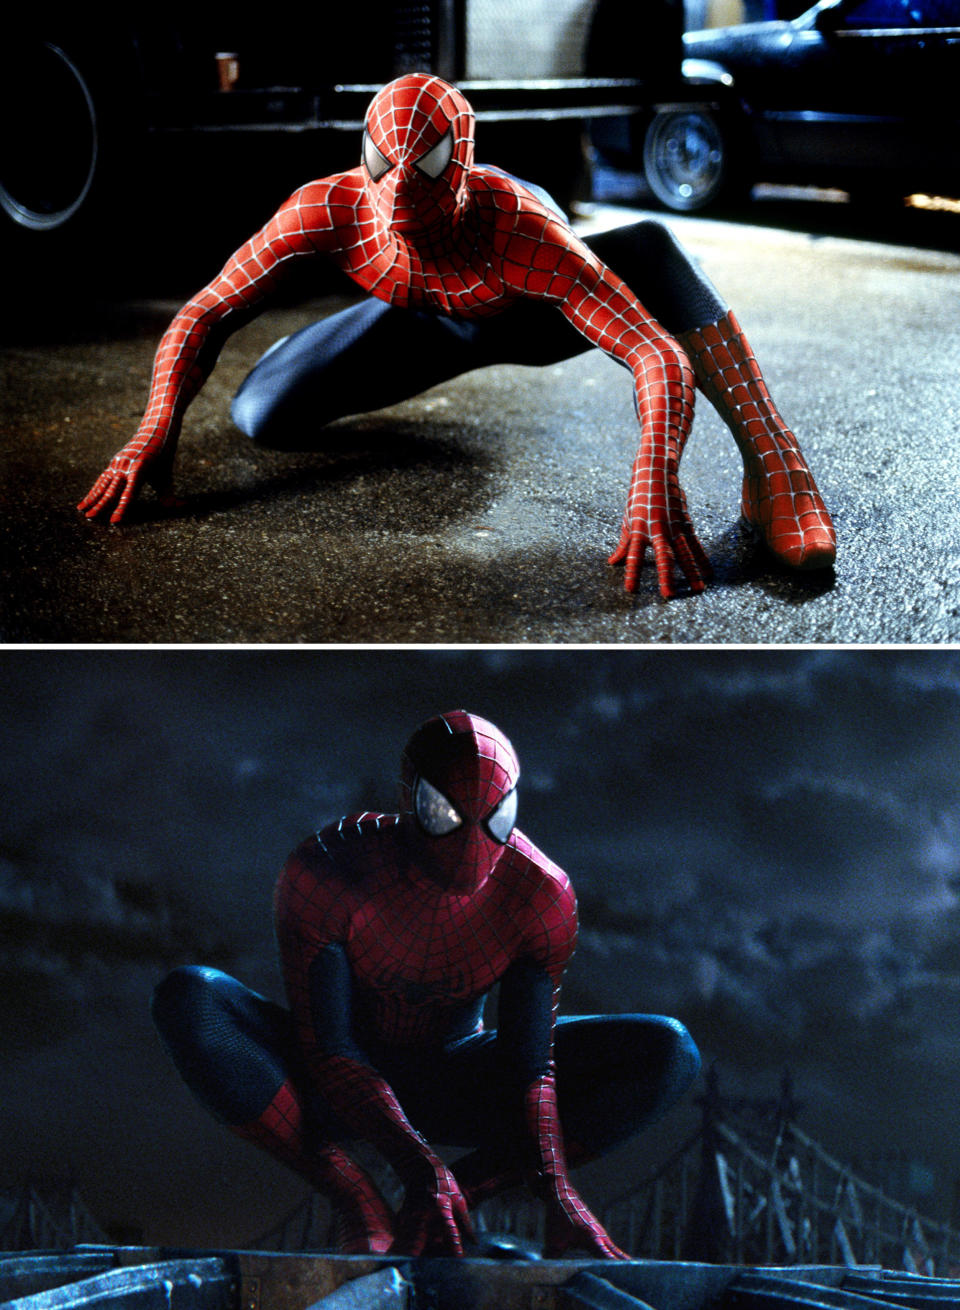 <div><p>"There’s a crucial, moral moment that they help him get through in the climax of the movie," screenwriter Chris McKenna began. "So much of that was brought by Tobey and Andrew’s ideas and shaping of what they thought their characters could bring to this story." In particular, Andrew loved the idea of his Peter being in a dark place still after Gwen and how he was able to use that pain to help Tom's Peter.</p></div><span> Sony / Columbia Pictures / Everett Collection</span>